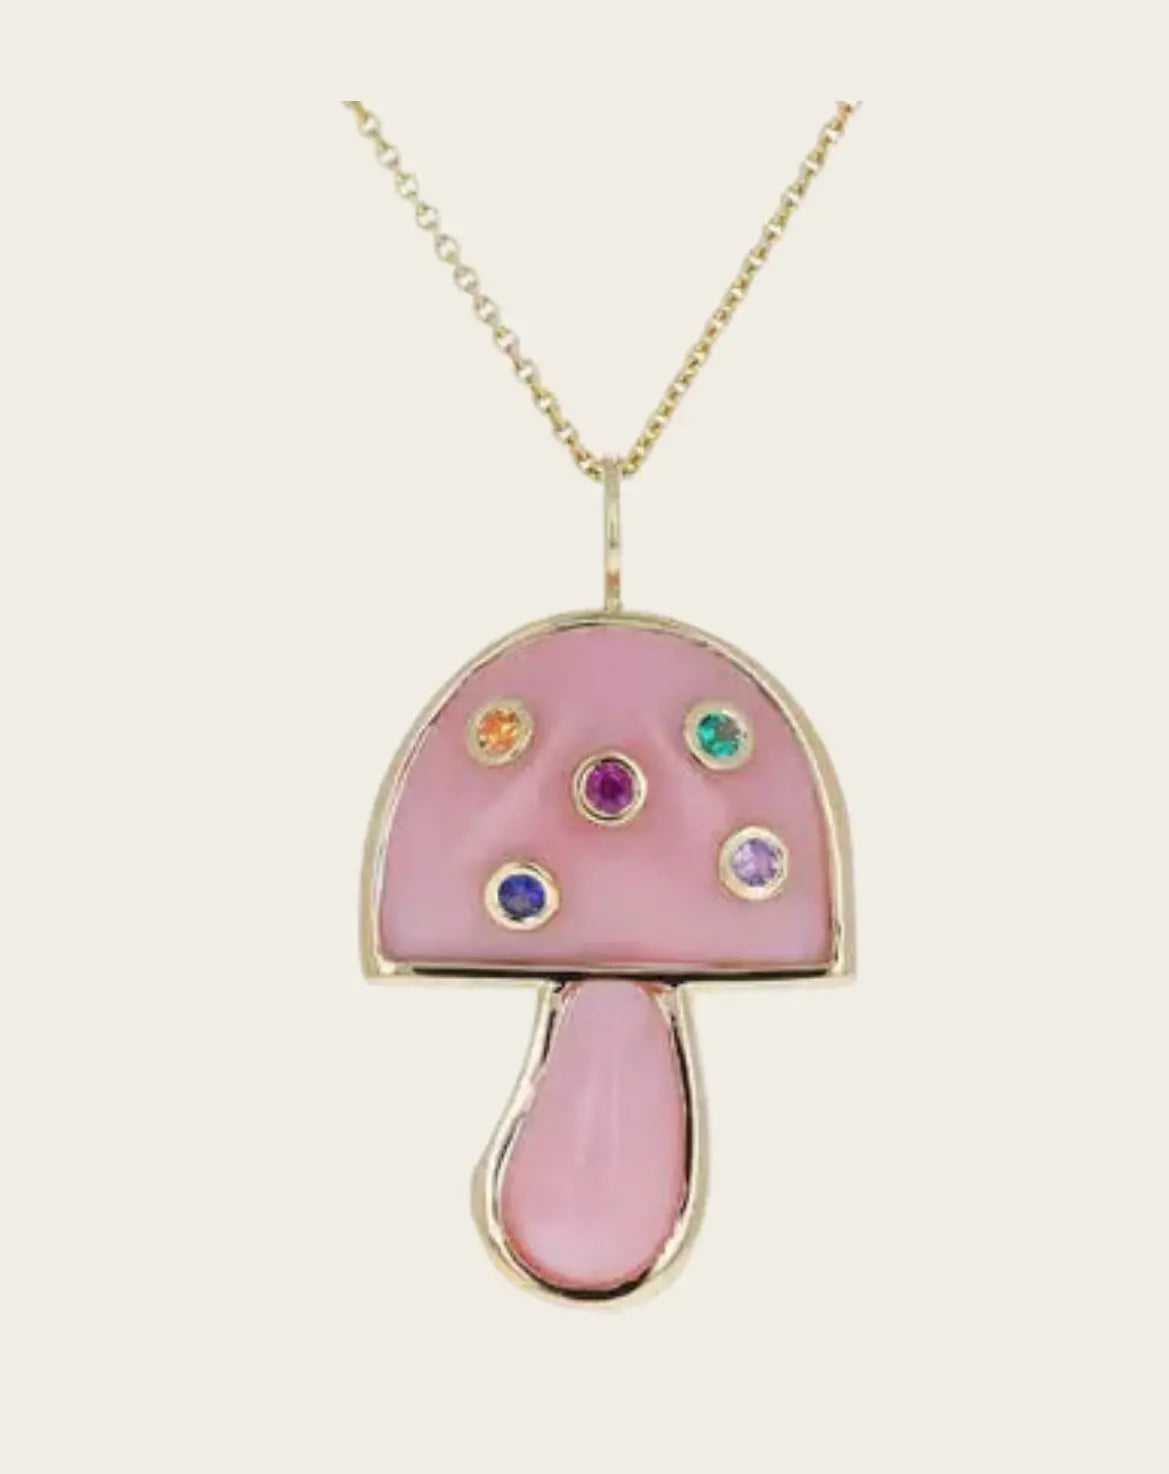 Brent Neale Pink Opal and Sapphire Mini Mushroom Necklace Brent Neale Pink Opal and Sapphire Mini Mushroom Necklace Brent Neale Brent Neale  Squash Blossom Vail